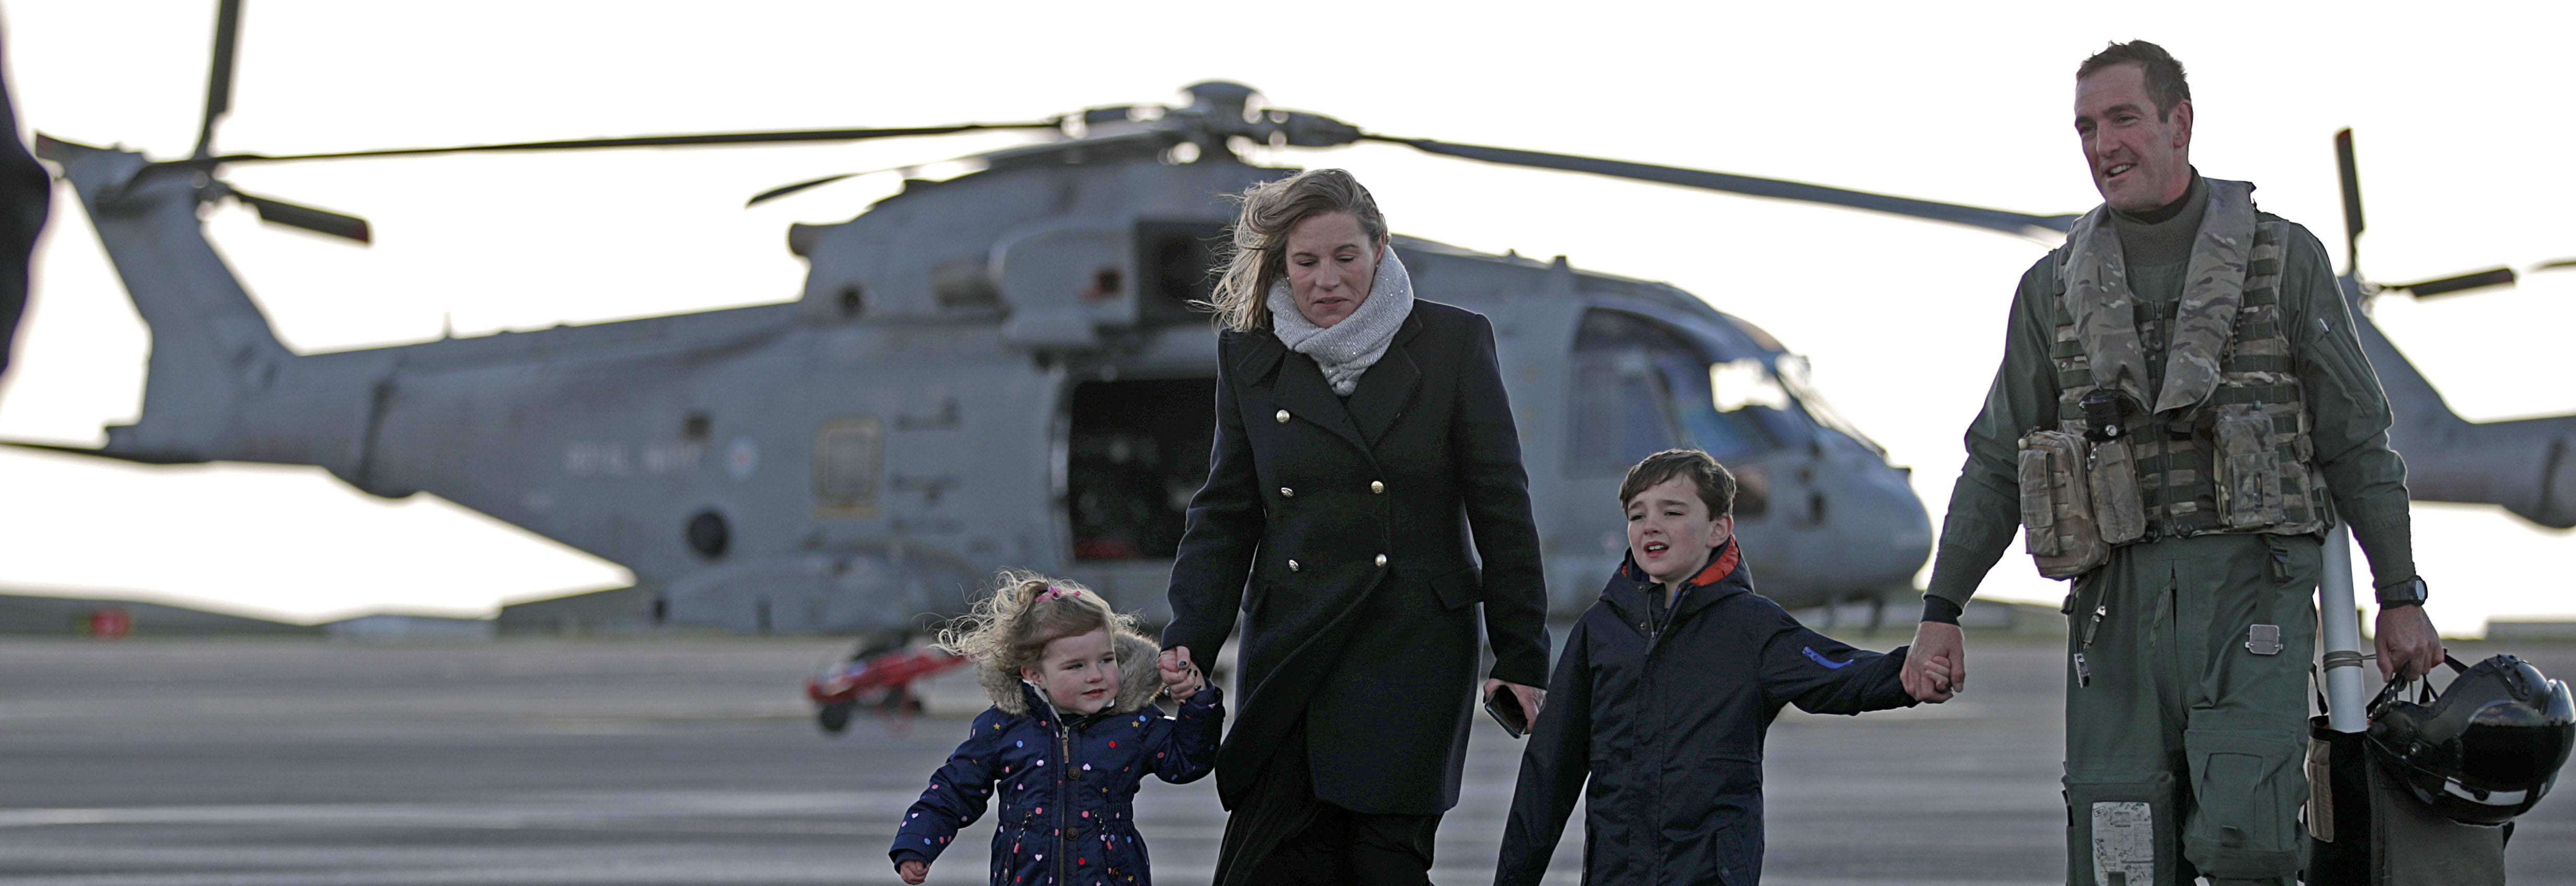 An airman and his family walks holding hands. In the background a Merlin helicopter.